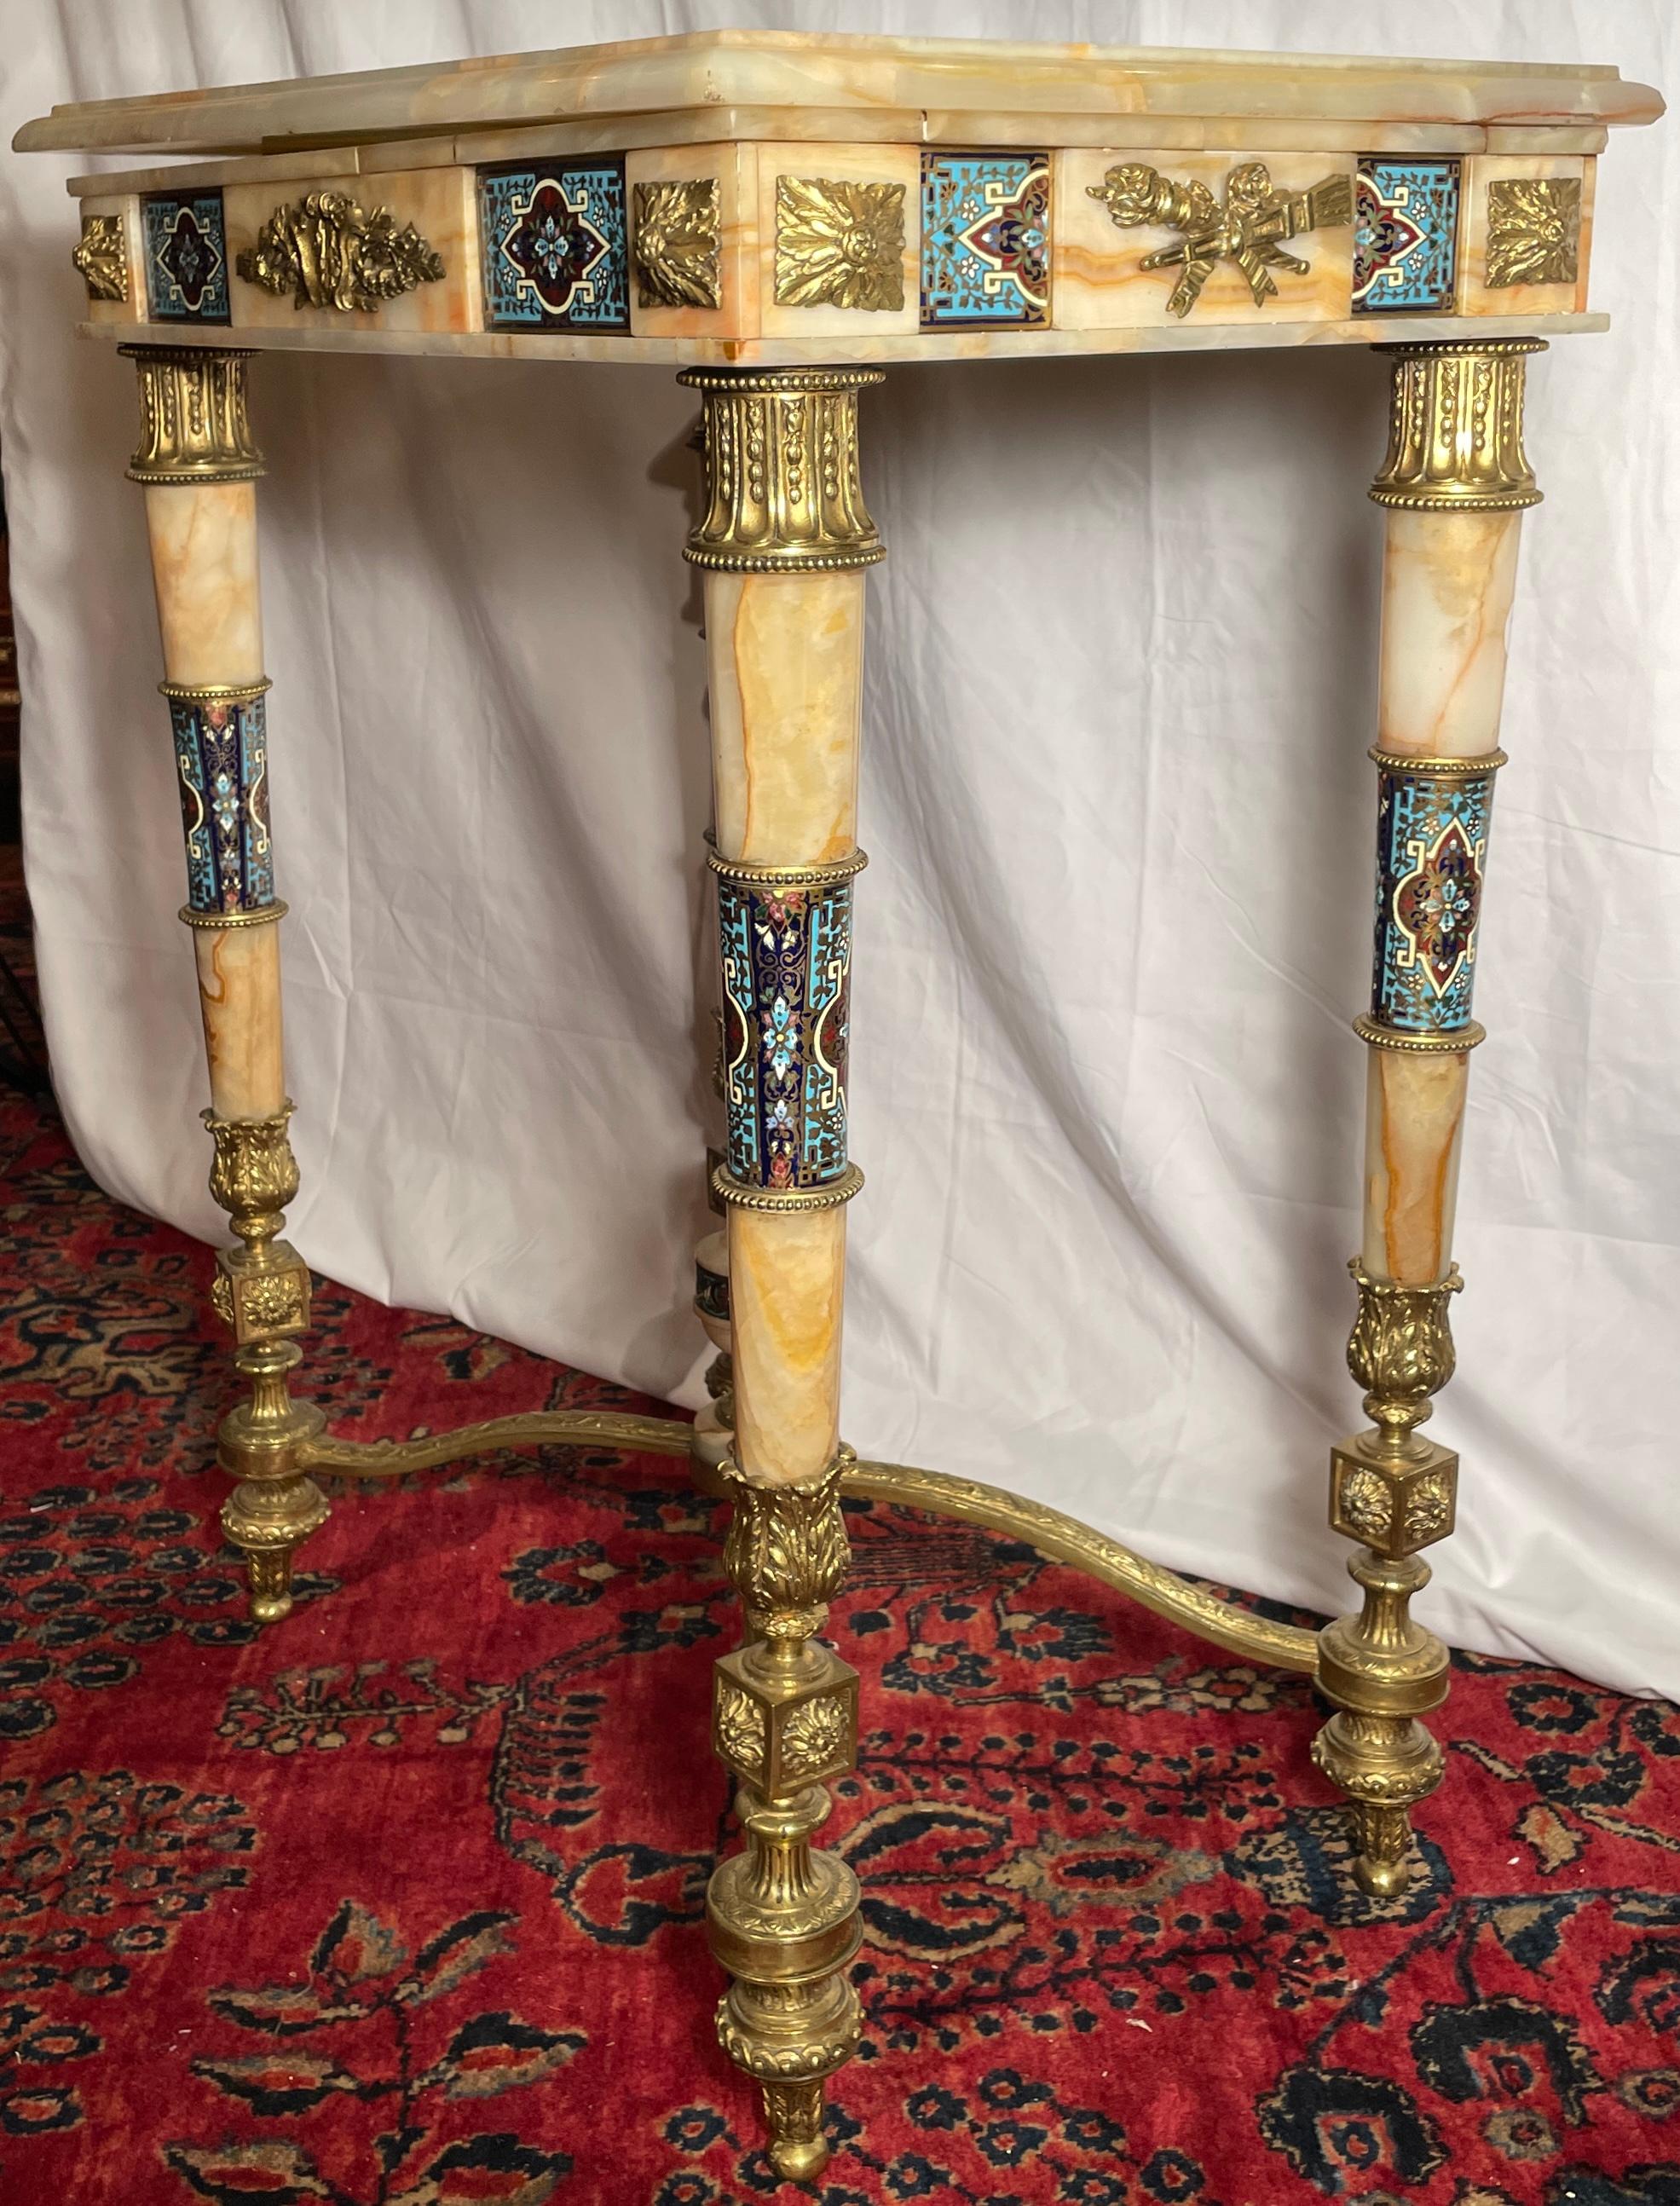 Antique Russian Onyx marble, Ormolu and Enamel Porcelain table, Circa 1875-1885.